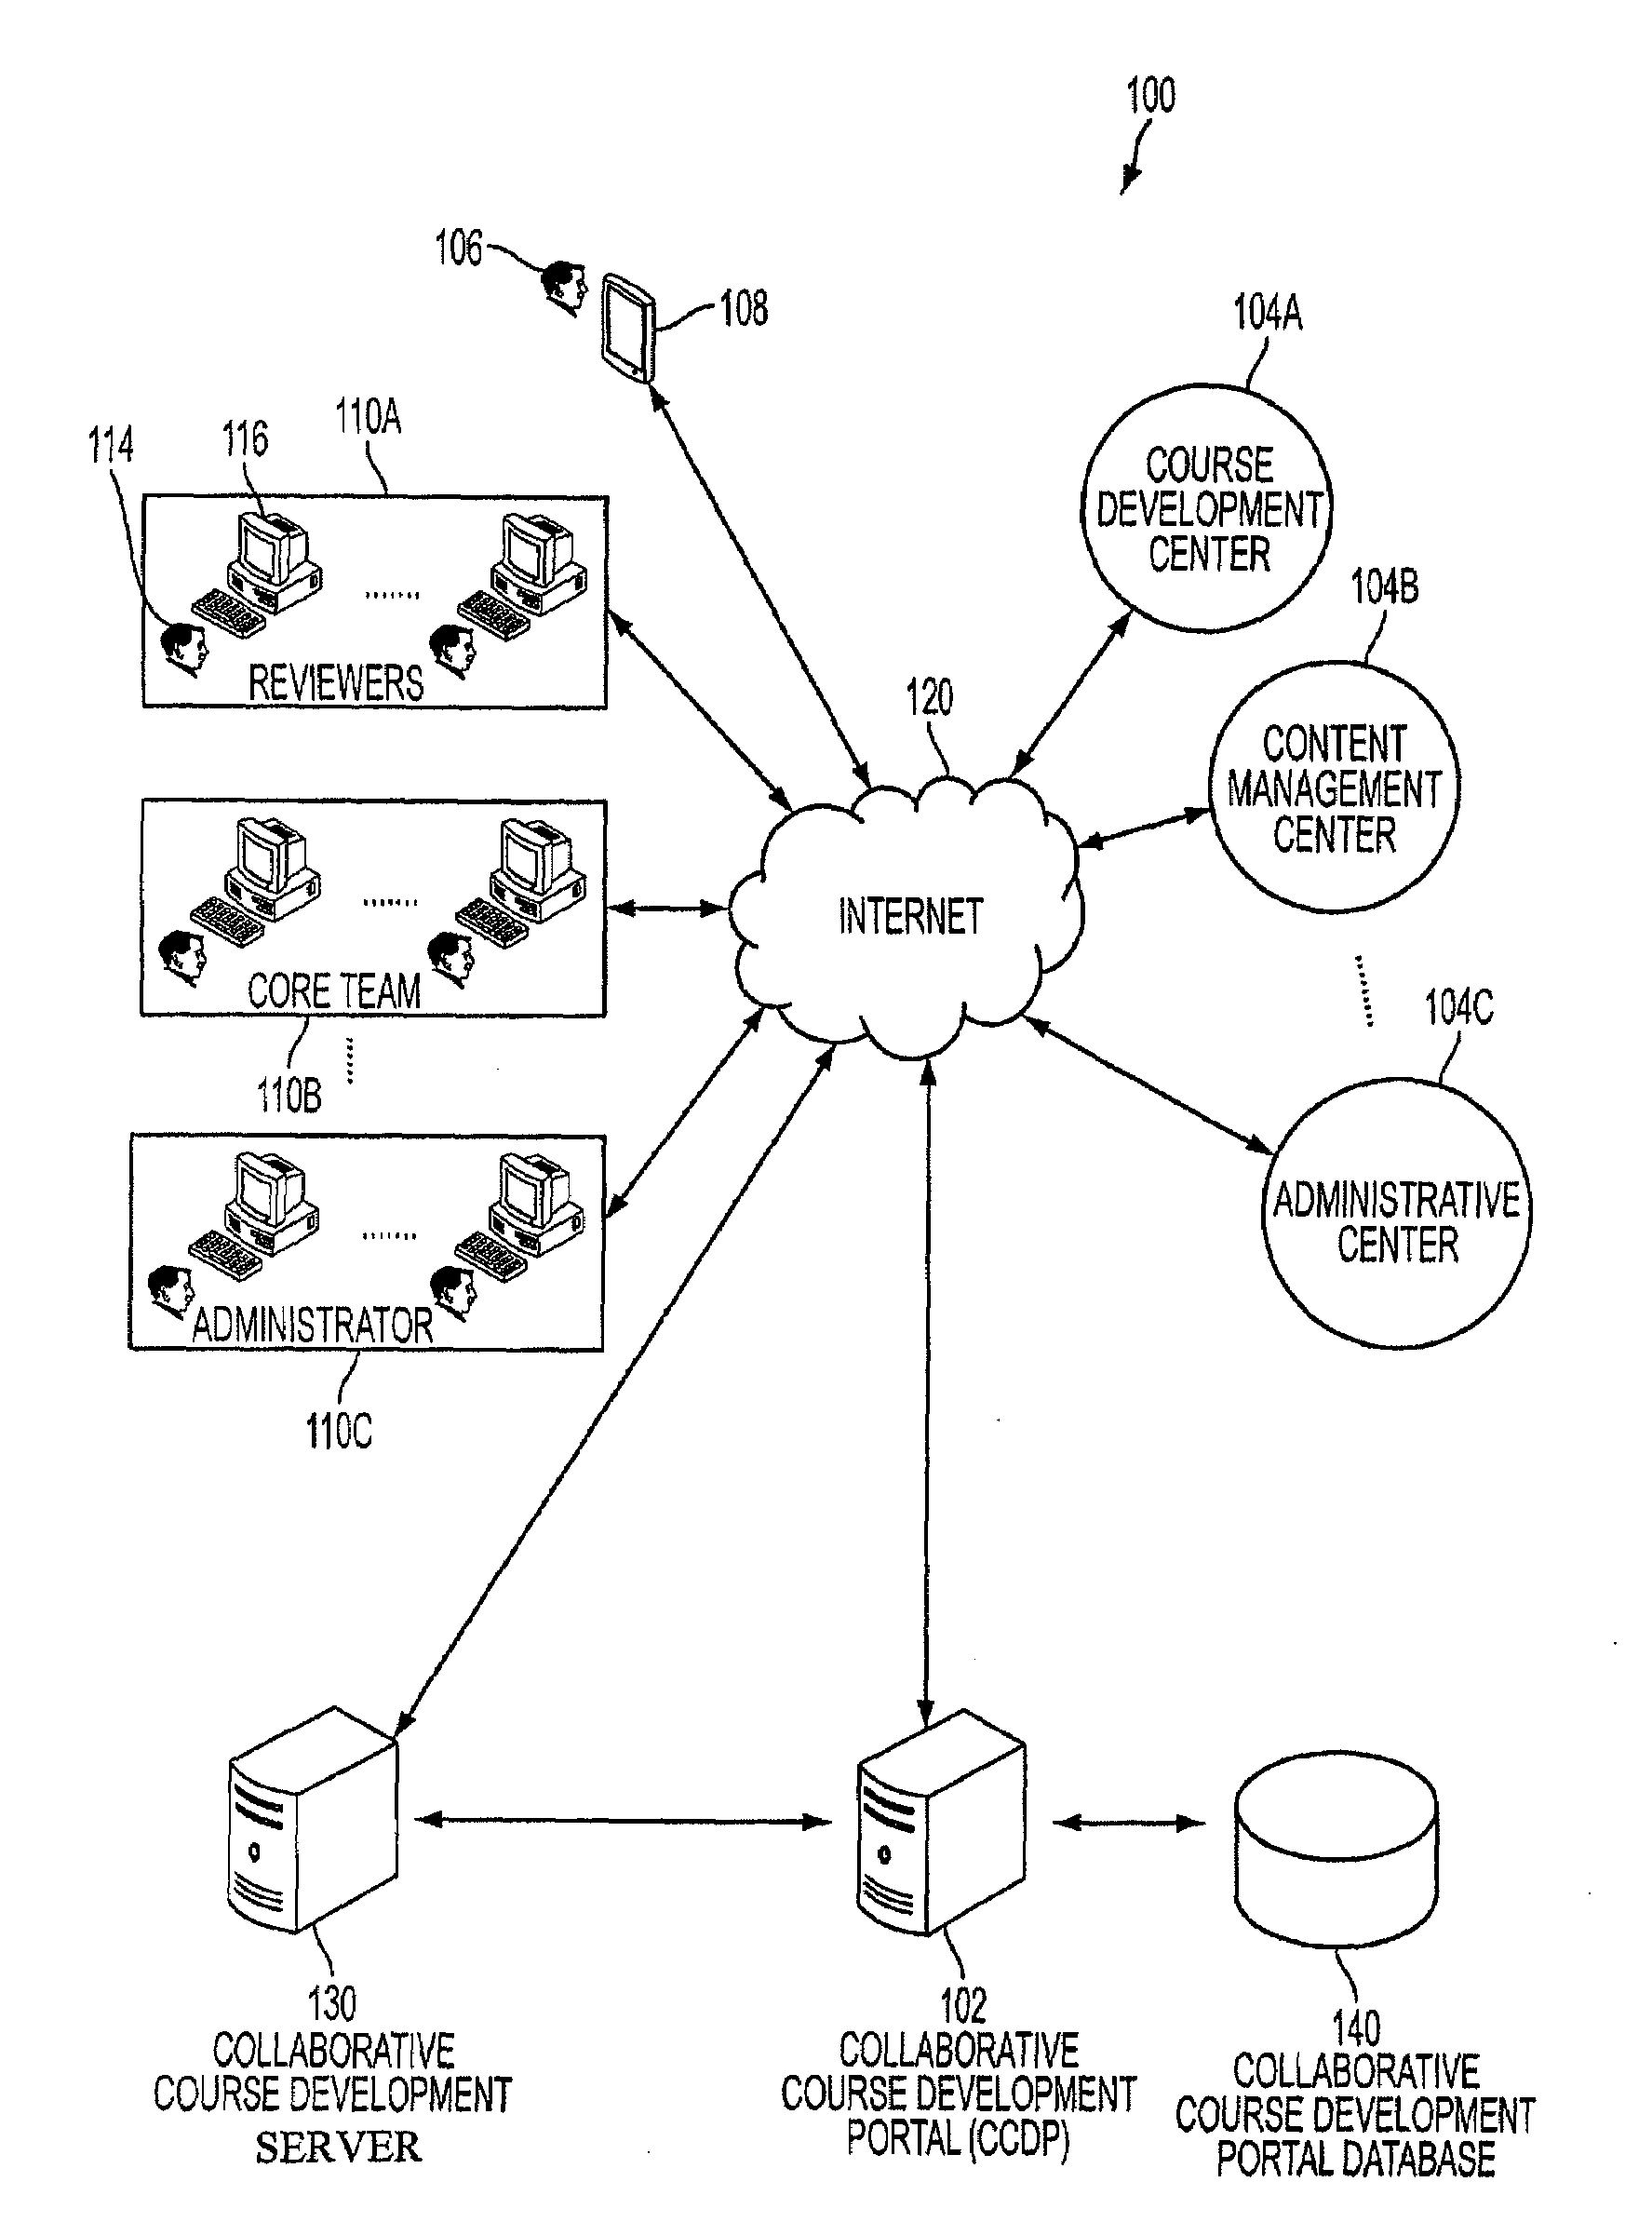 System and method for collaborative development of online courses and programs of study